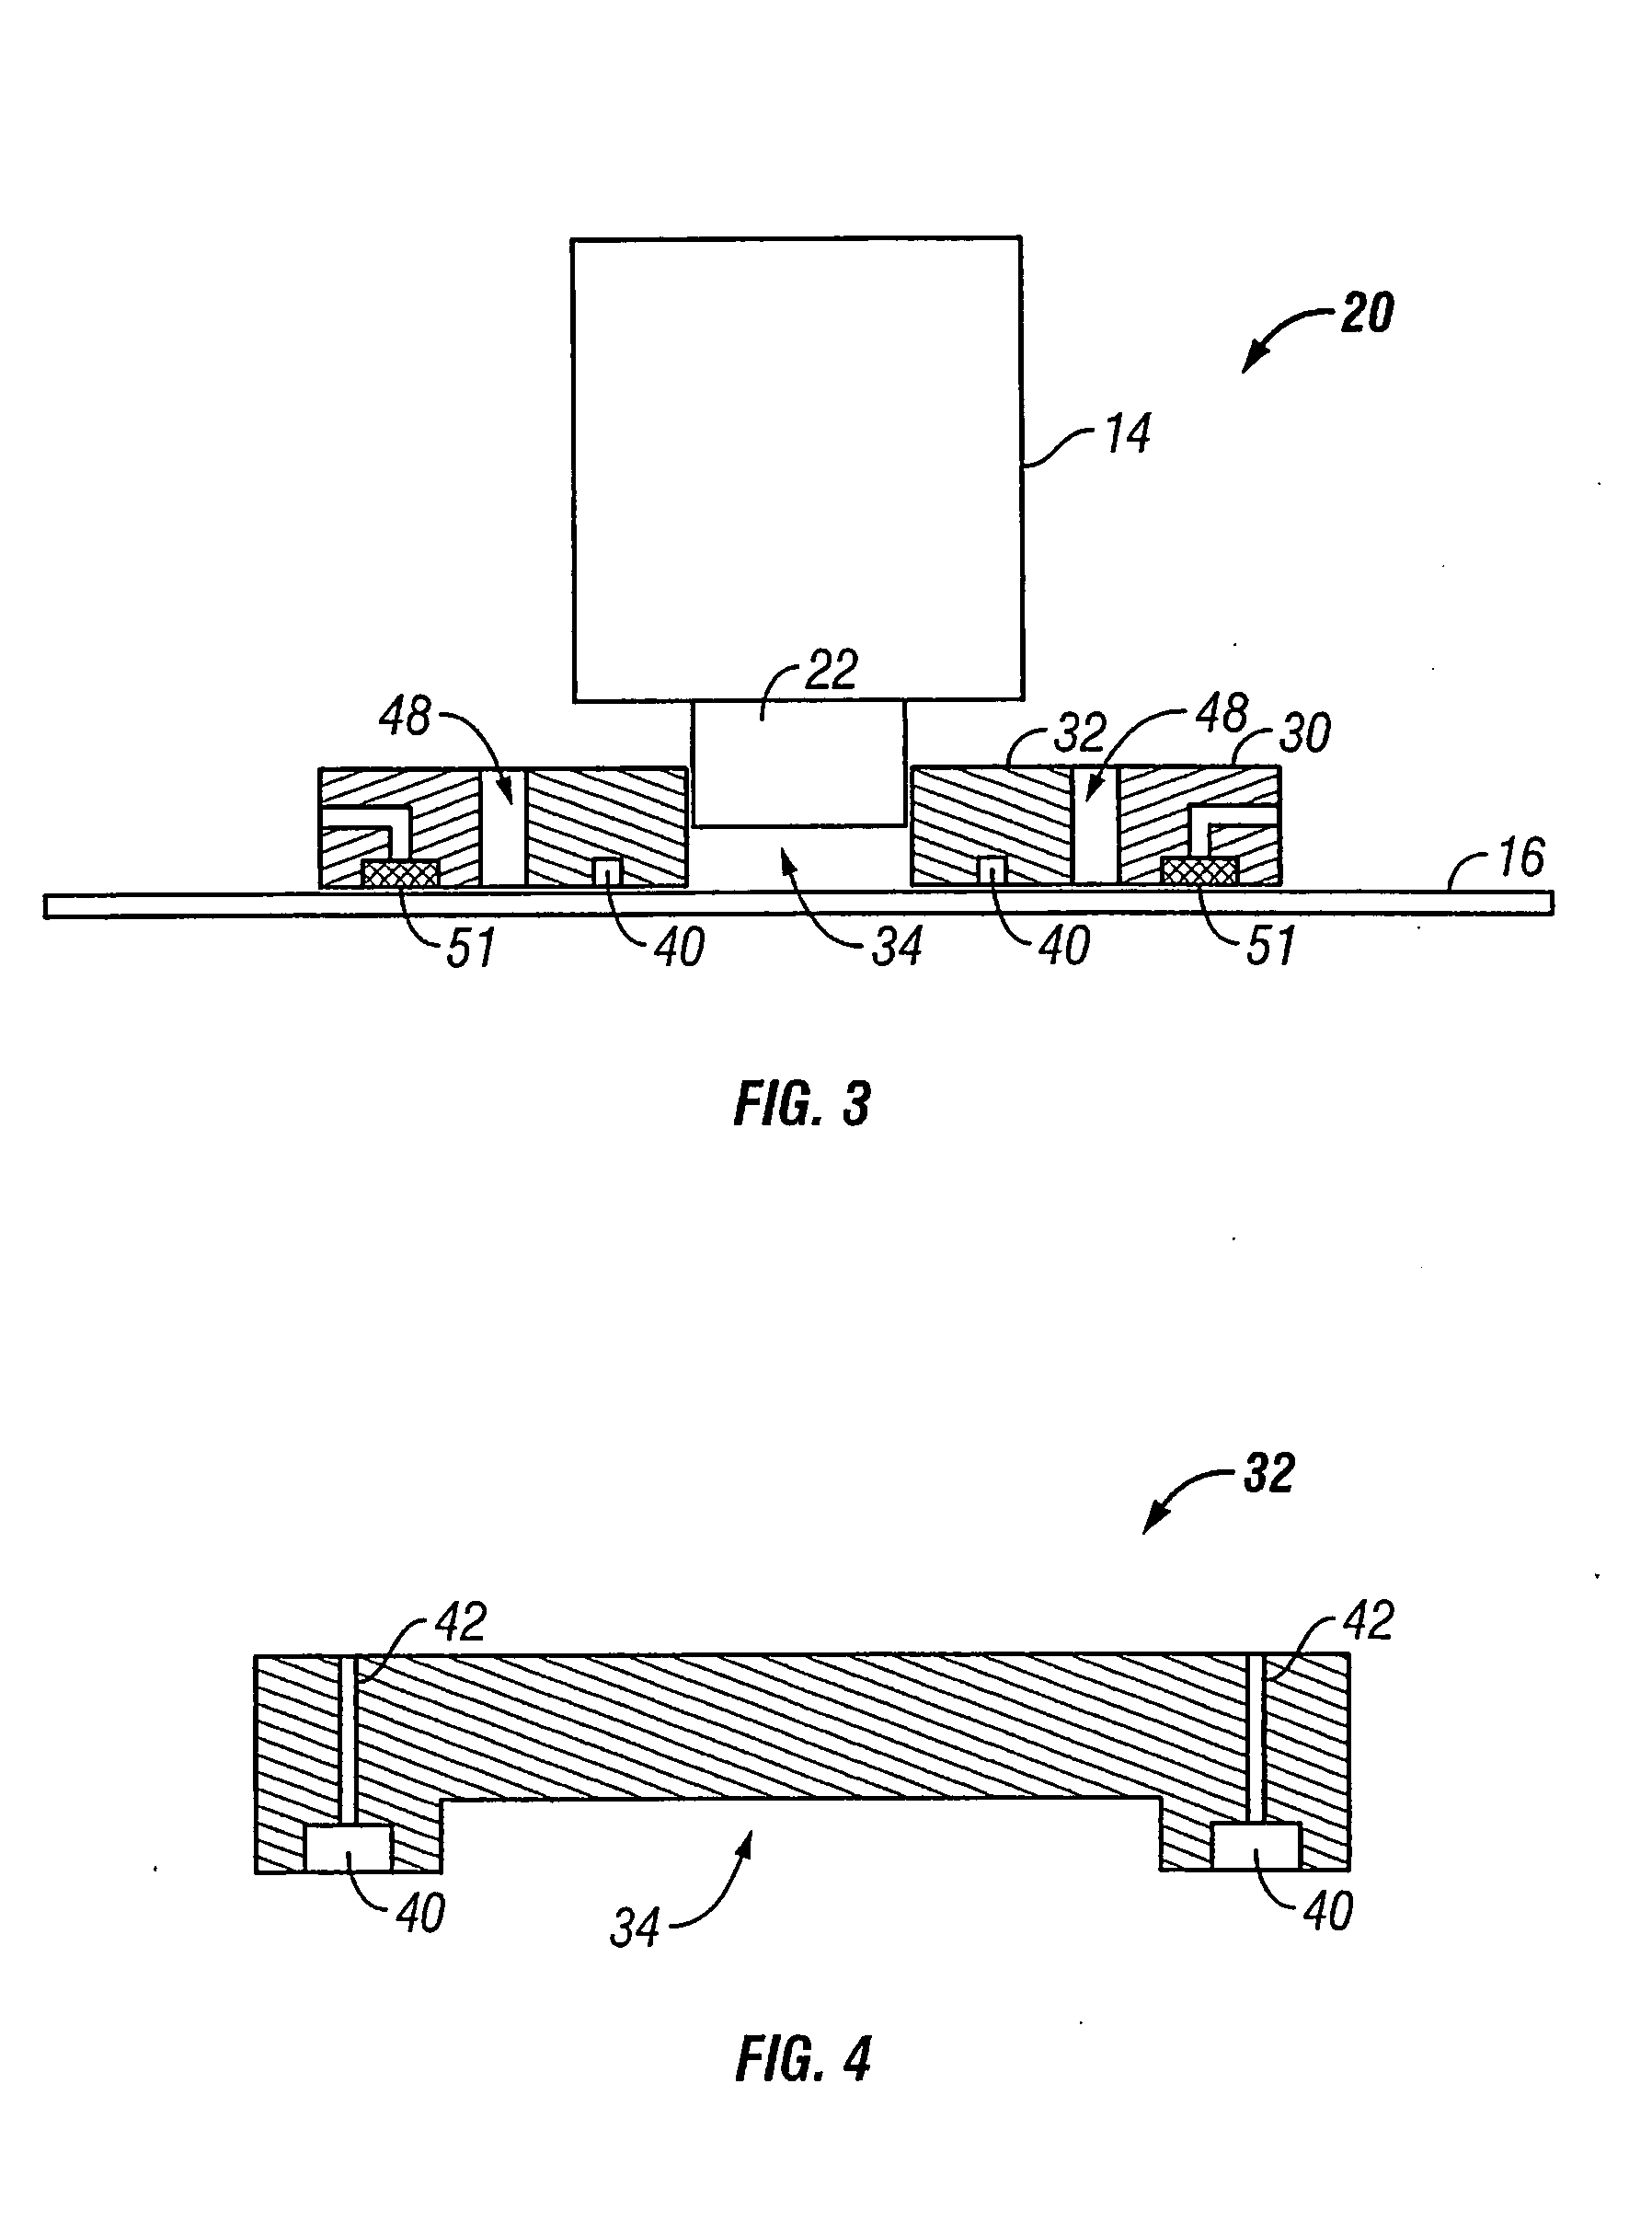 Apparatus and method for providing fluid for immersion lithography